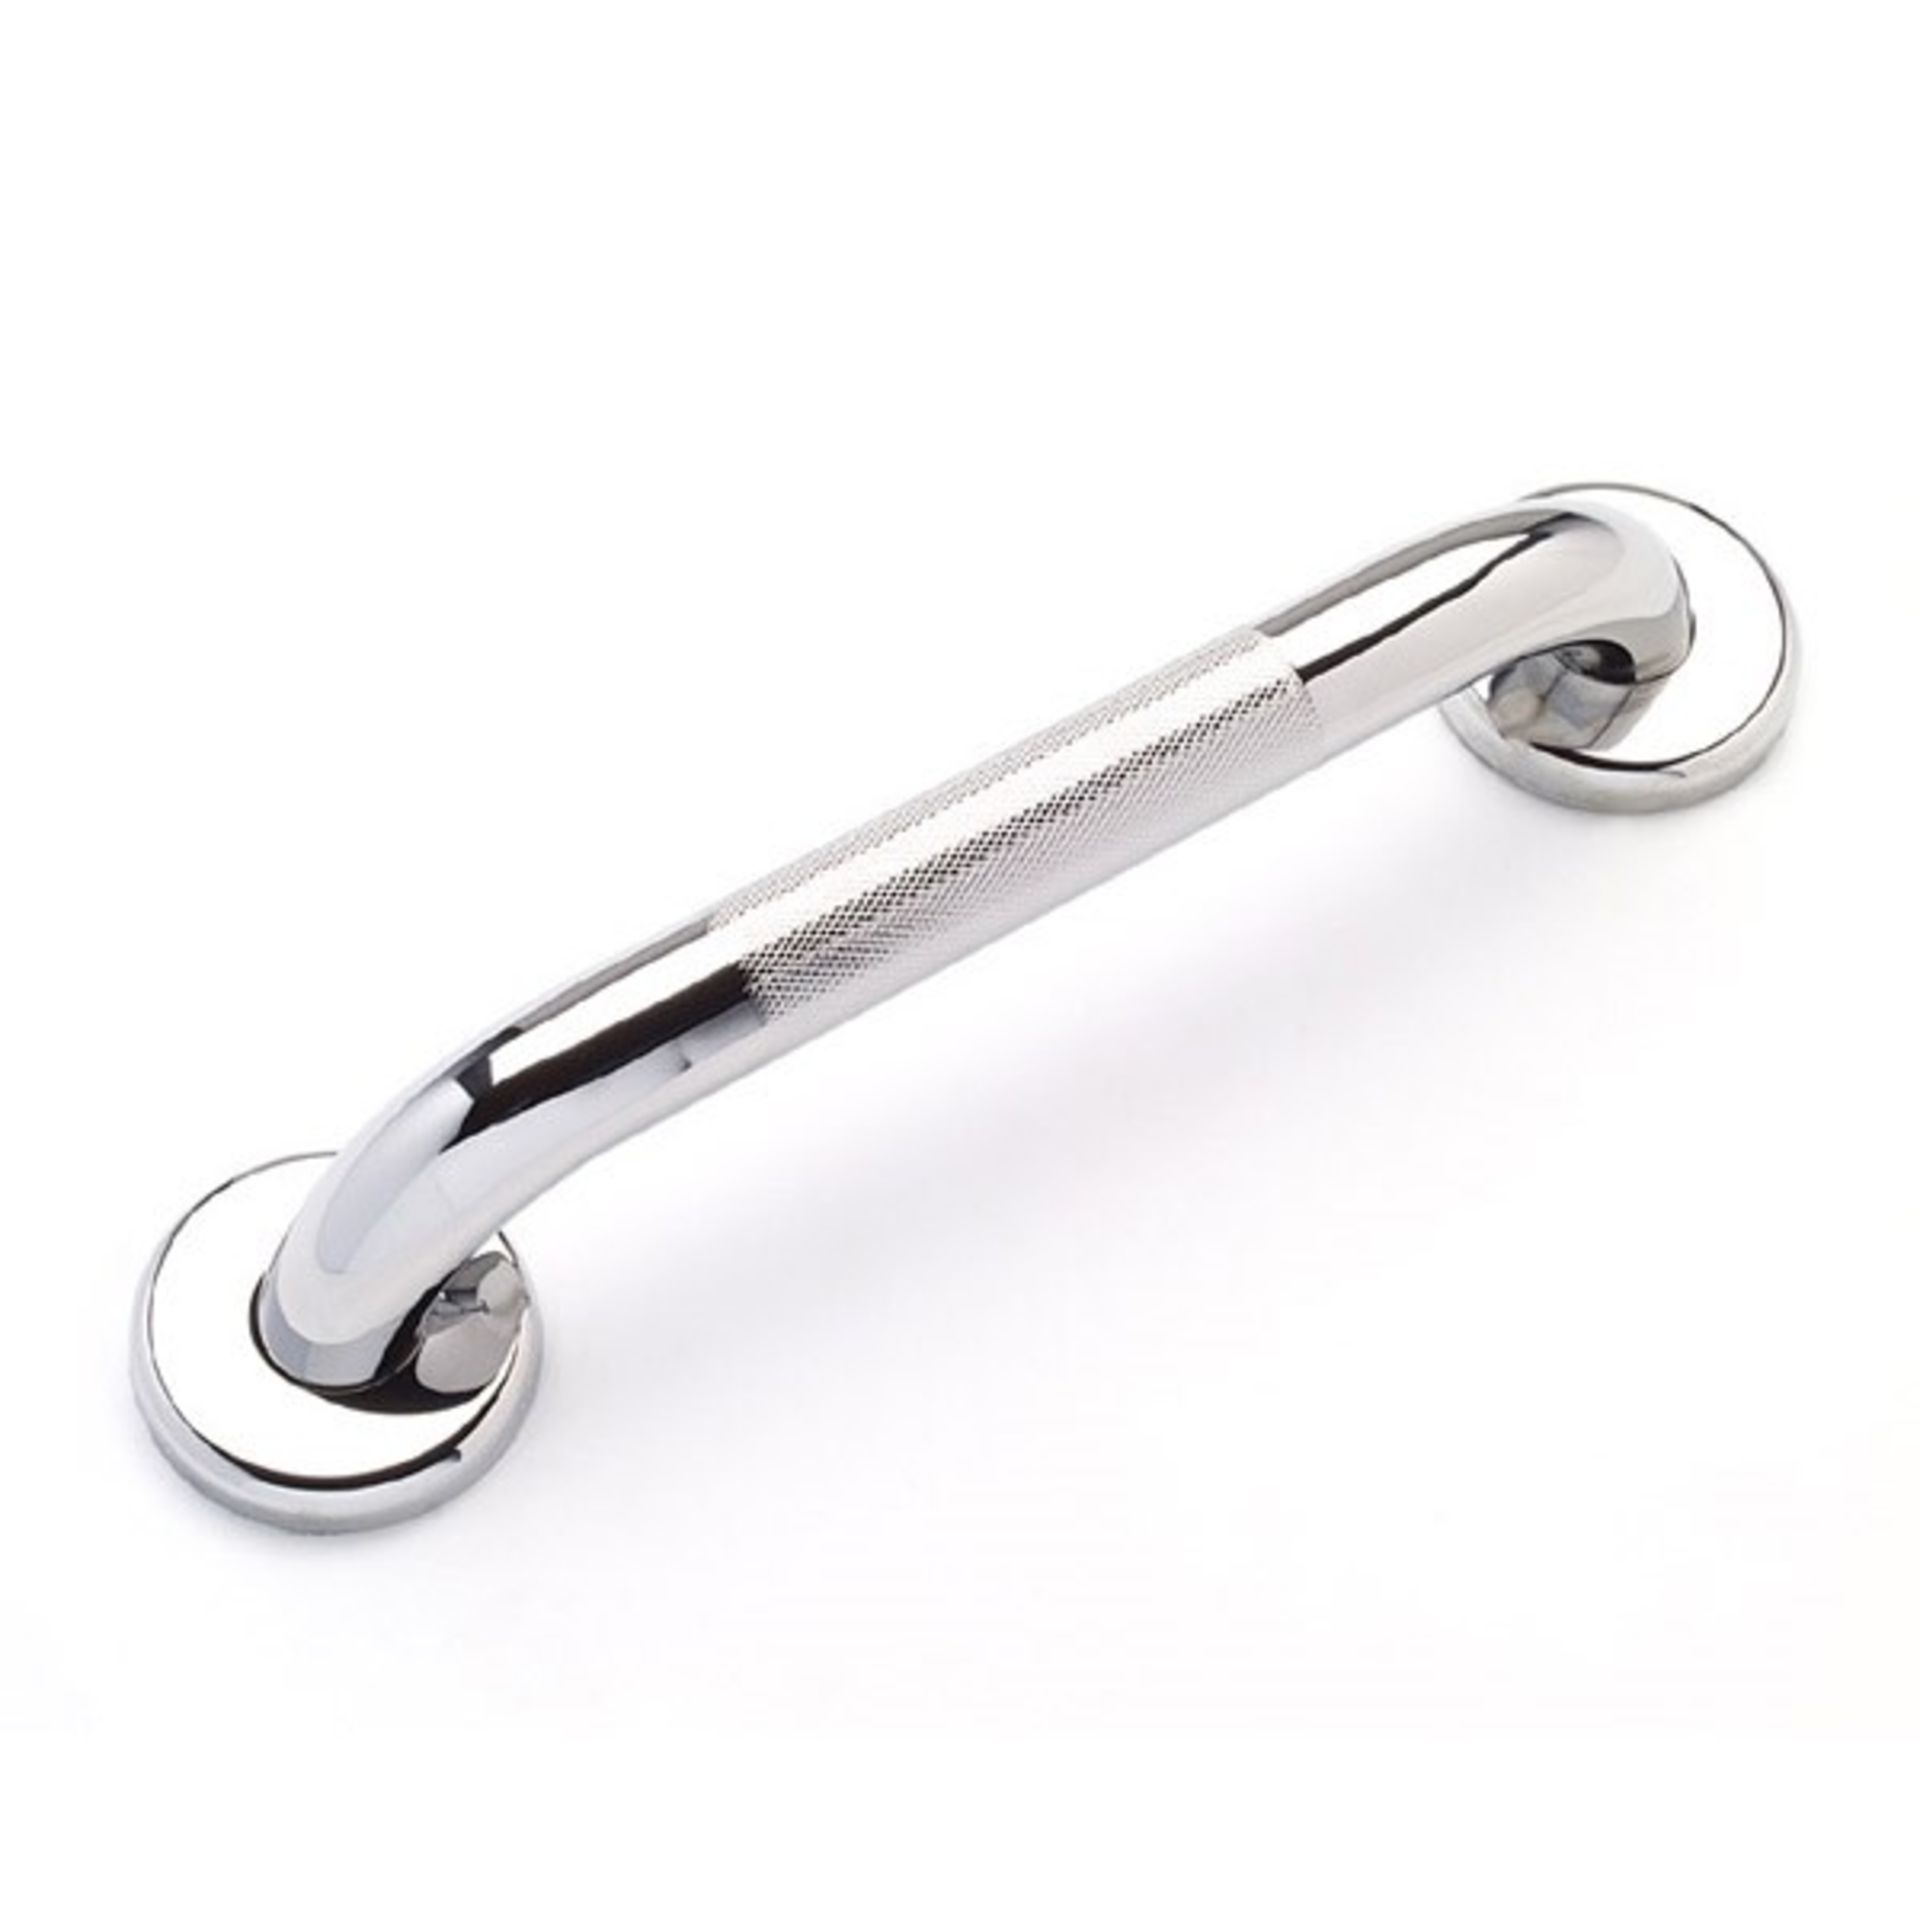 ME : 1 AS NEW BAGGED CHROME GRAB RAIL WITH ENGRAVED GRIP - APPROX 16" - AA06491 / RRP £28.64 (